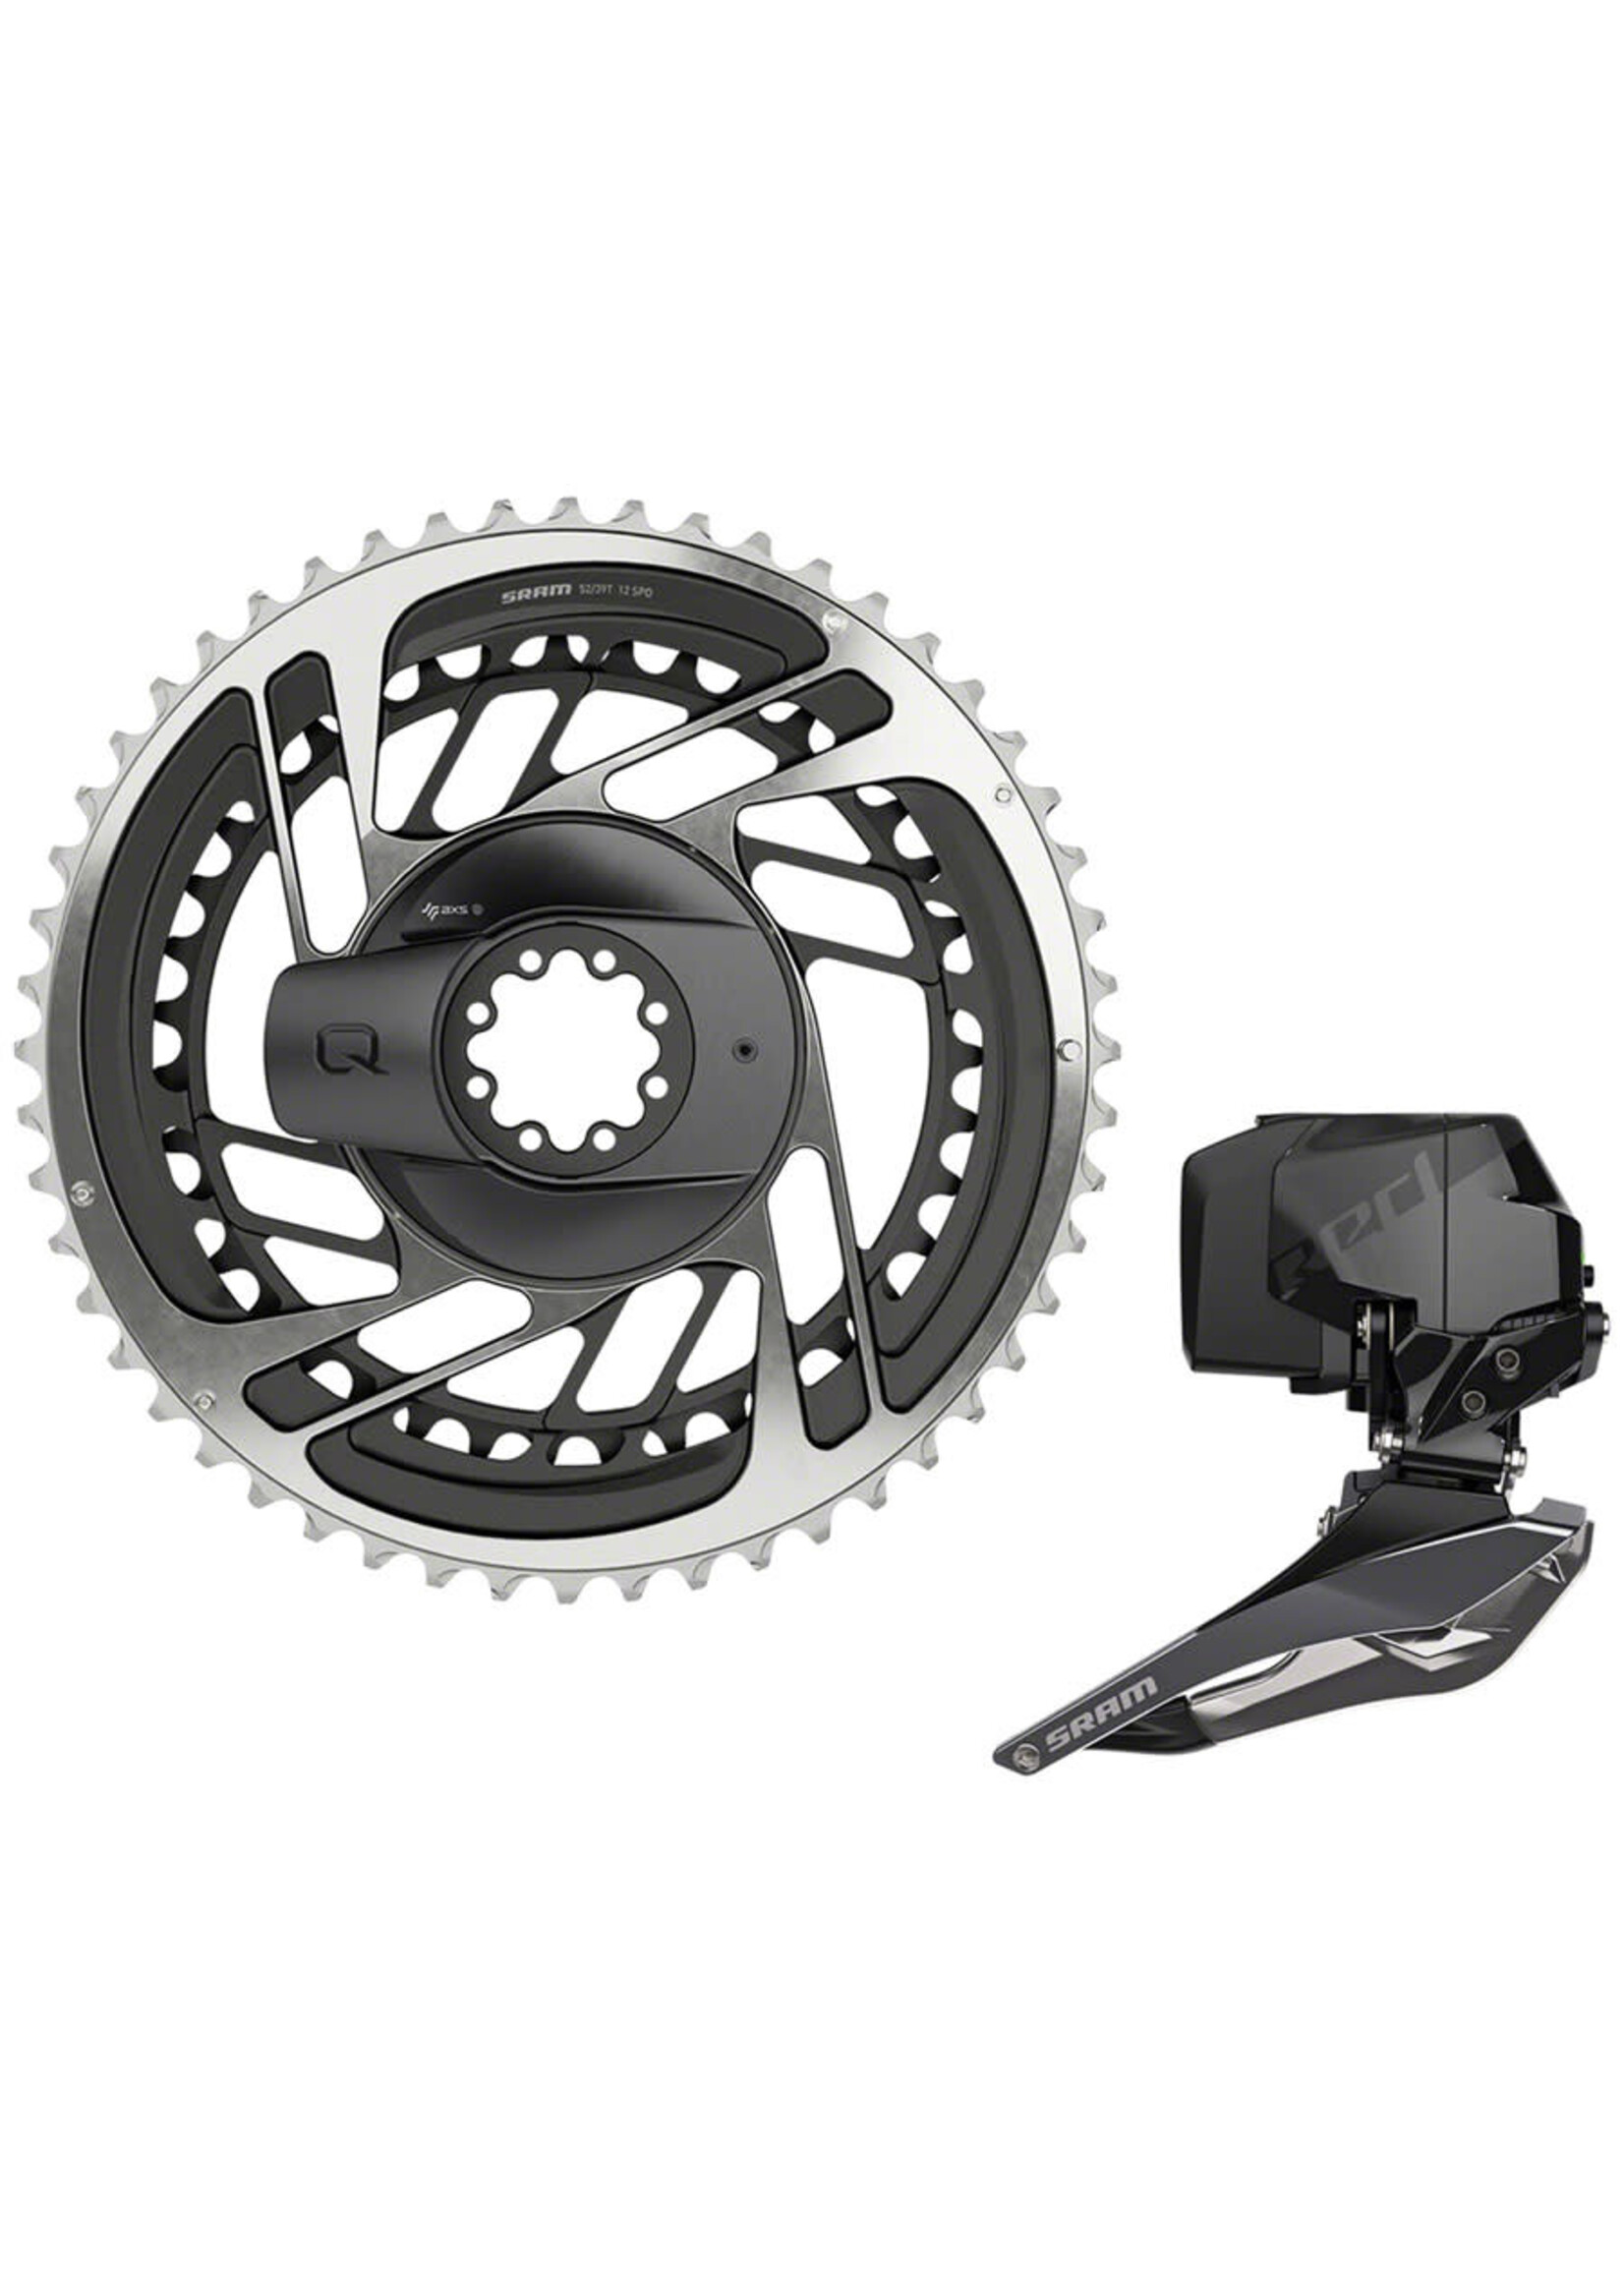 SRAM Power Meter KIT DM5441T RED AXS D1 GREY (Includes Power Meter w Integrated Chainrings, Red AXS 2-Position Front Derailleur